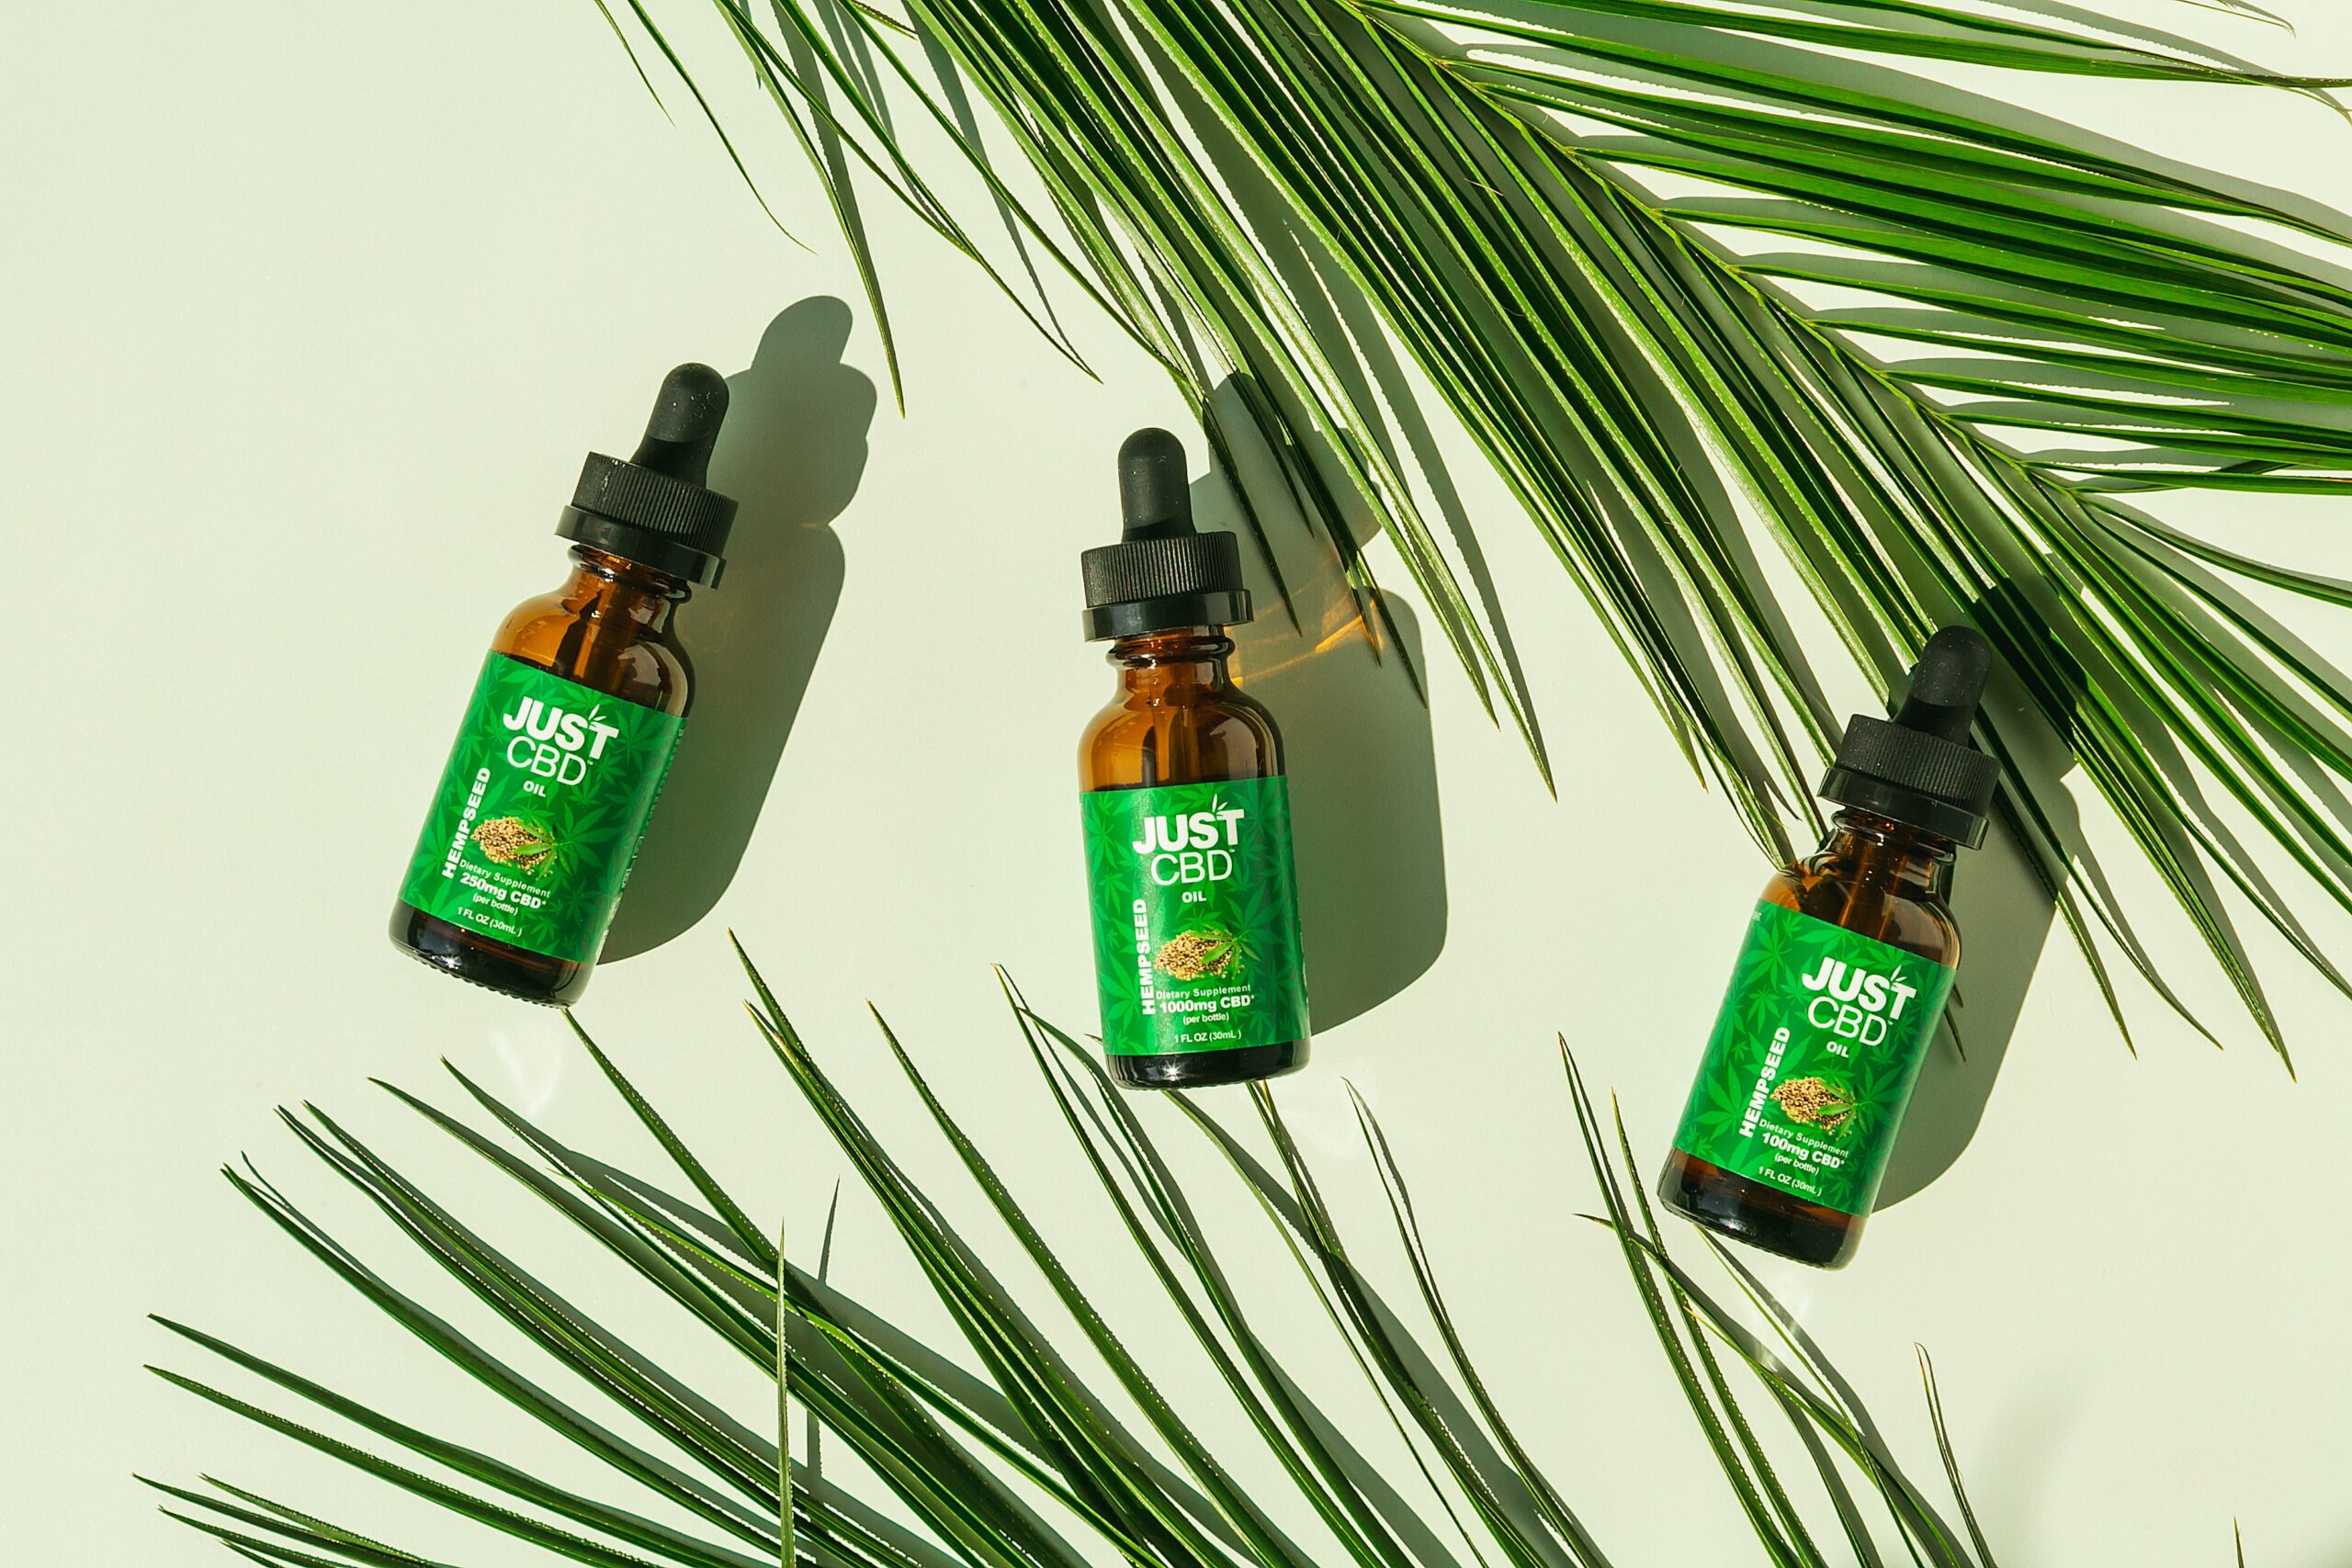 4 WAYS CBD CAN HELP WITH WEIGHT LOSS AND MANAGE STRESS